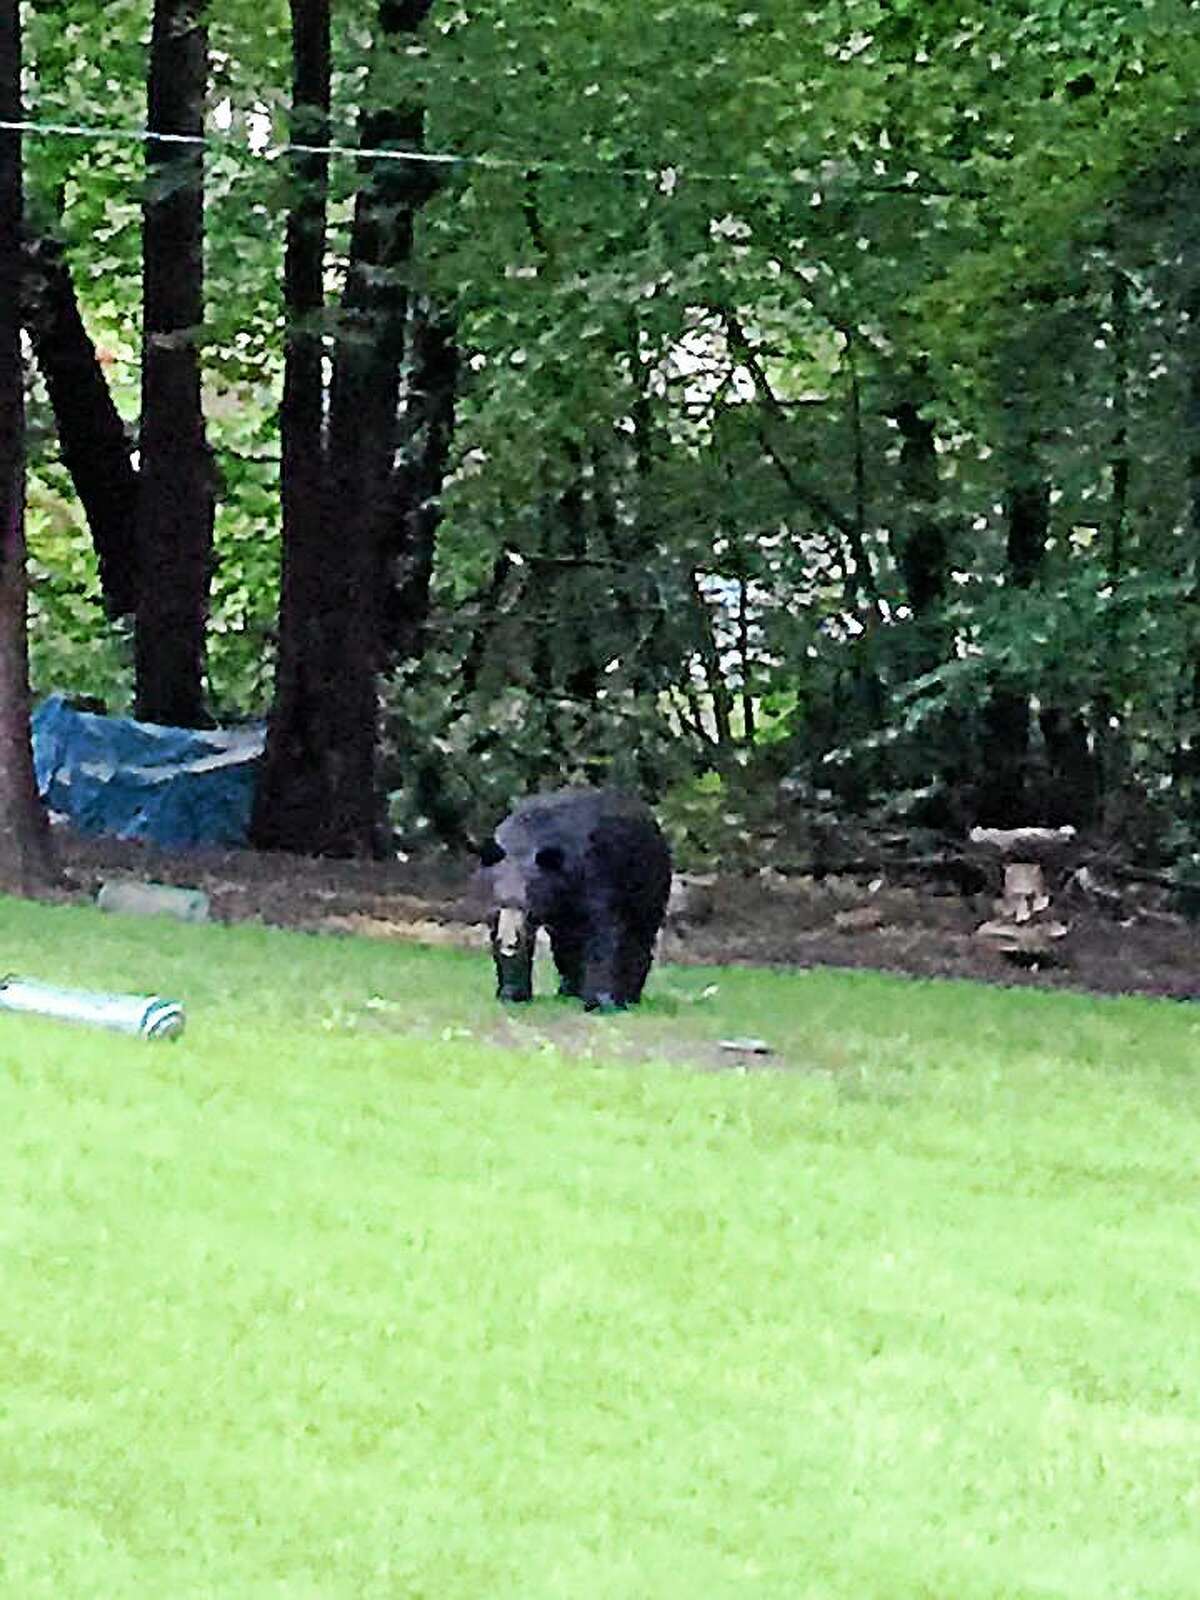 A black bear has been spotted in Seymour.